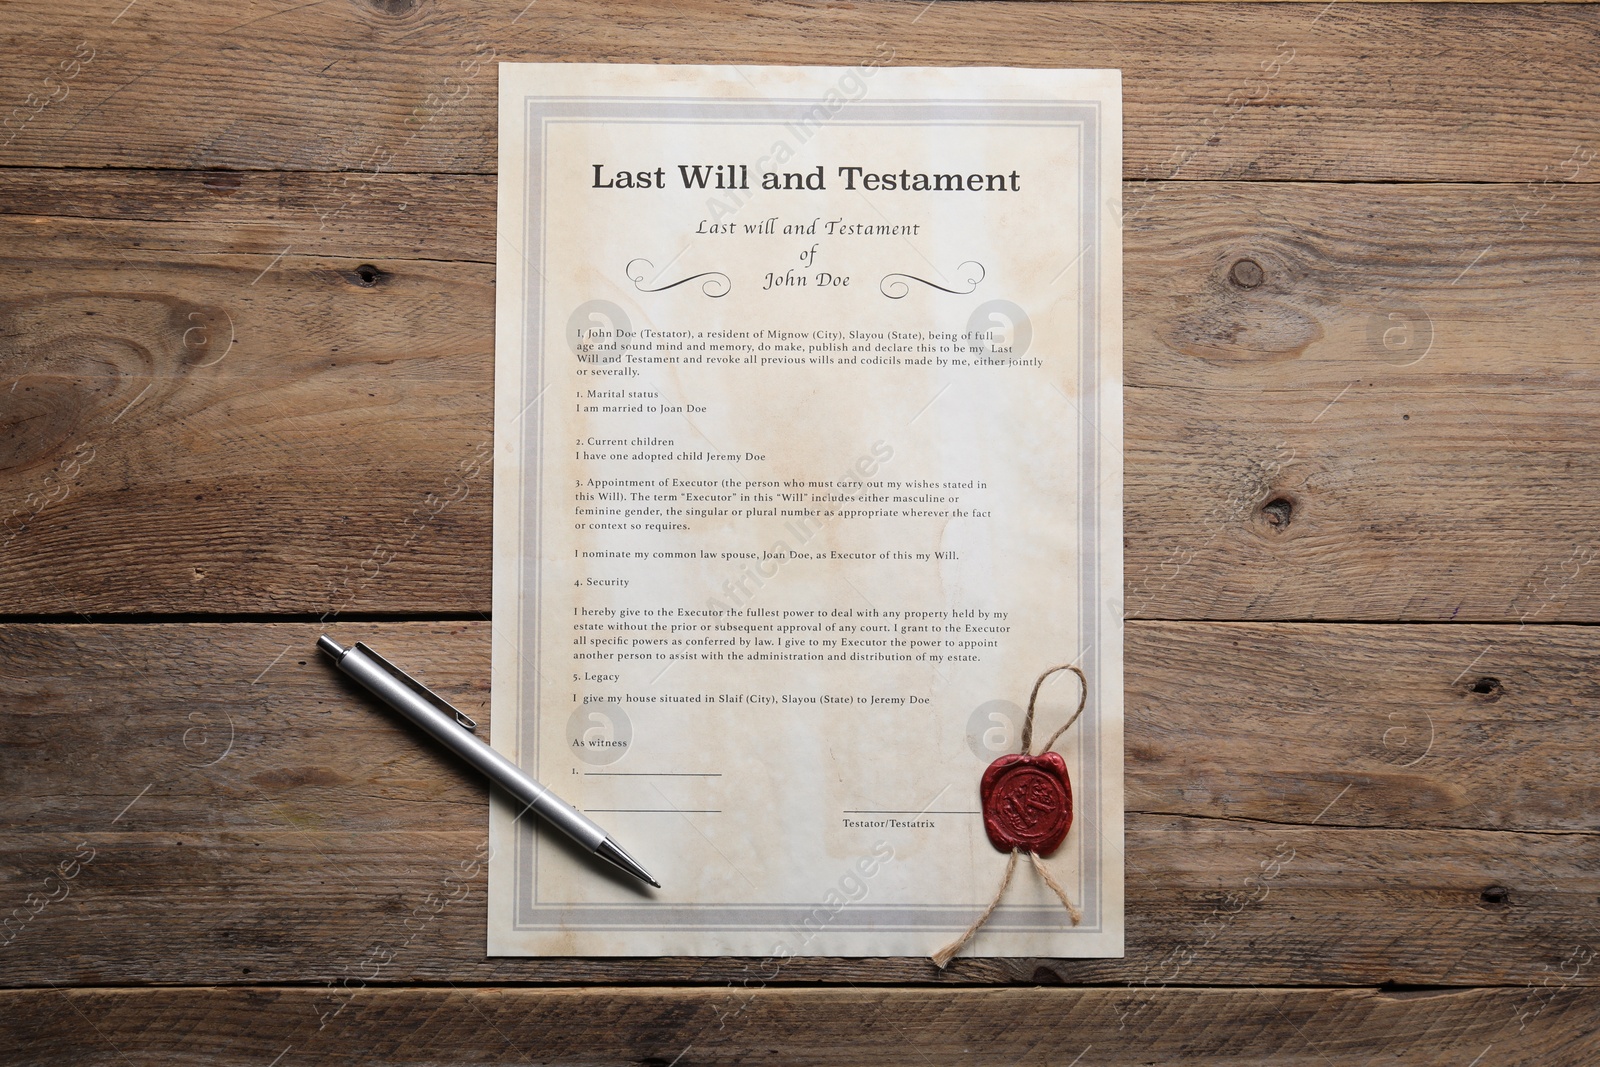 Photo of Last Will and Testament with pen on wooden table, top view